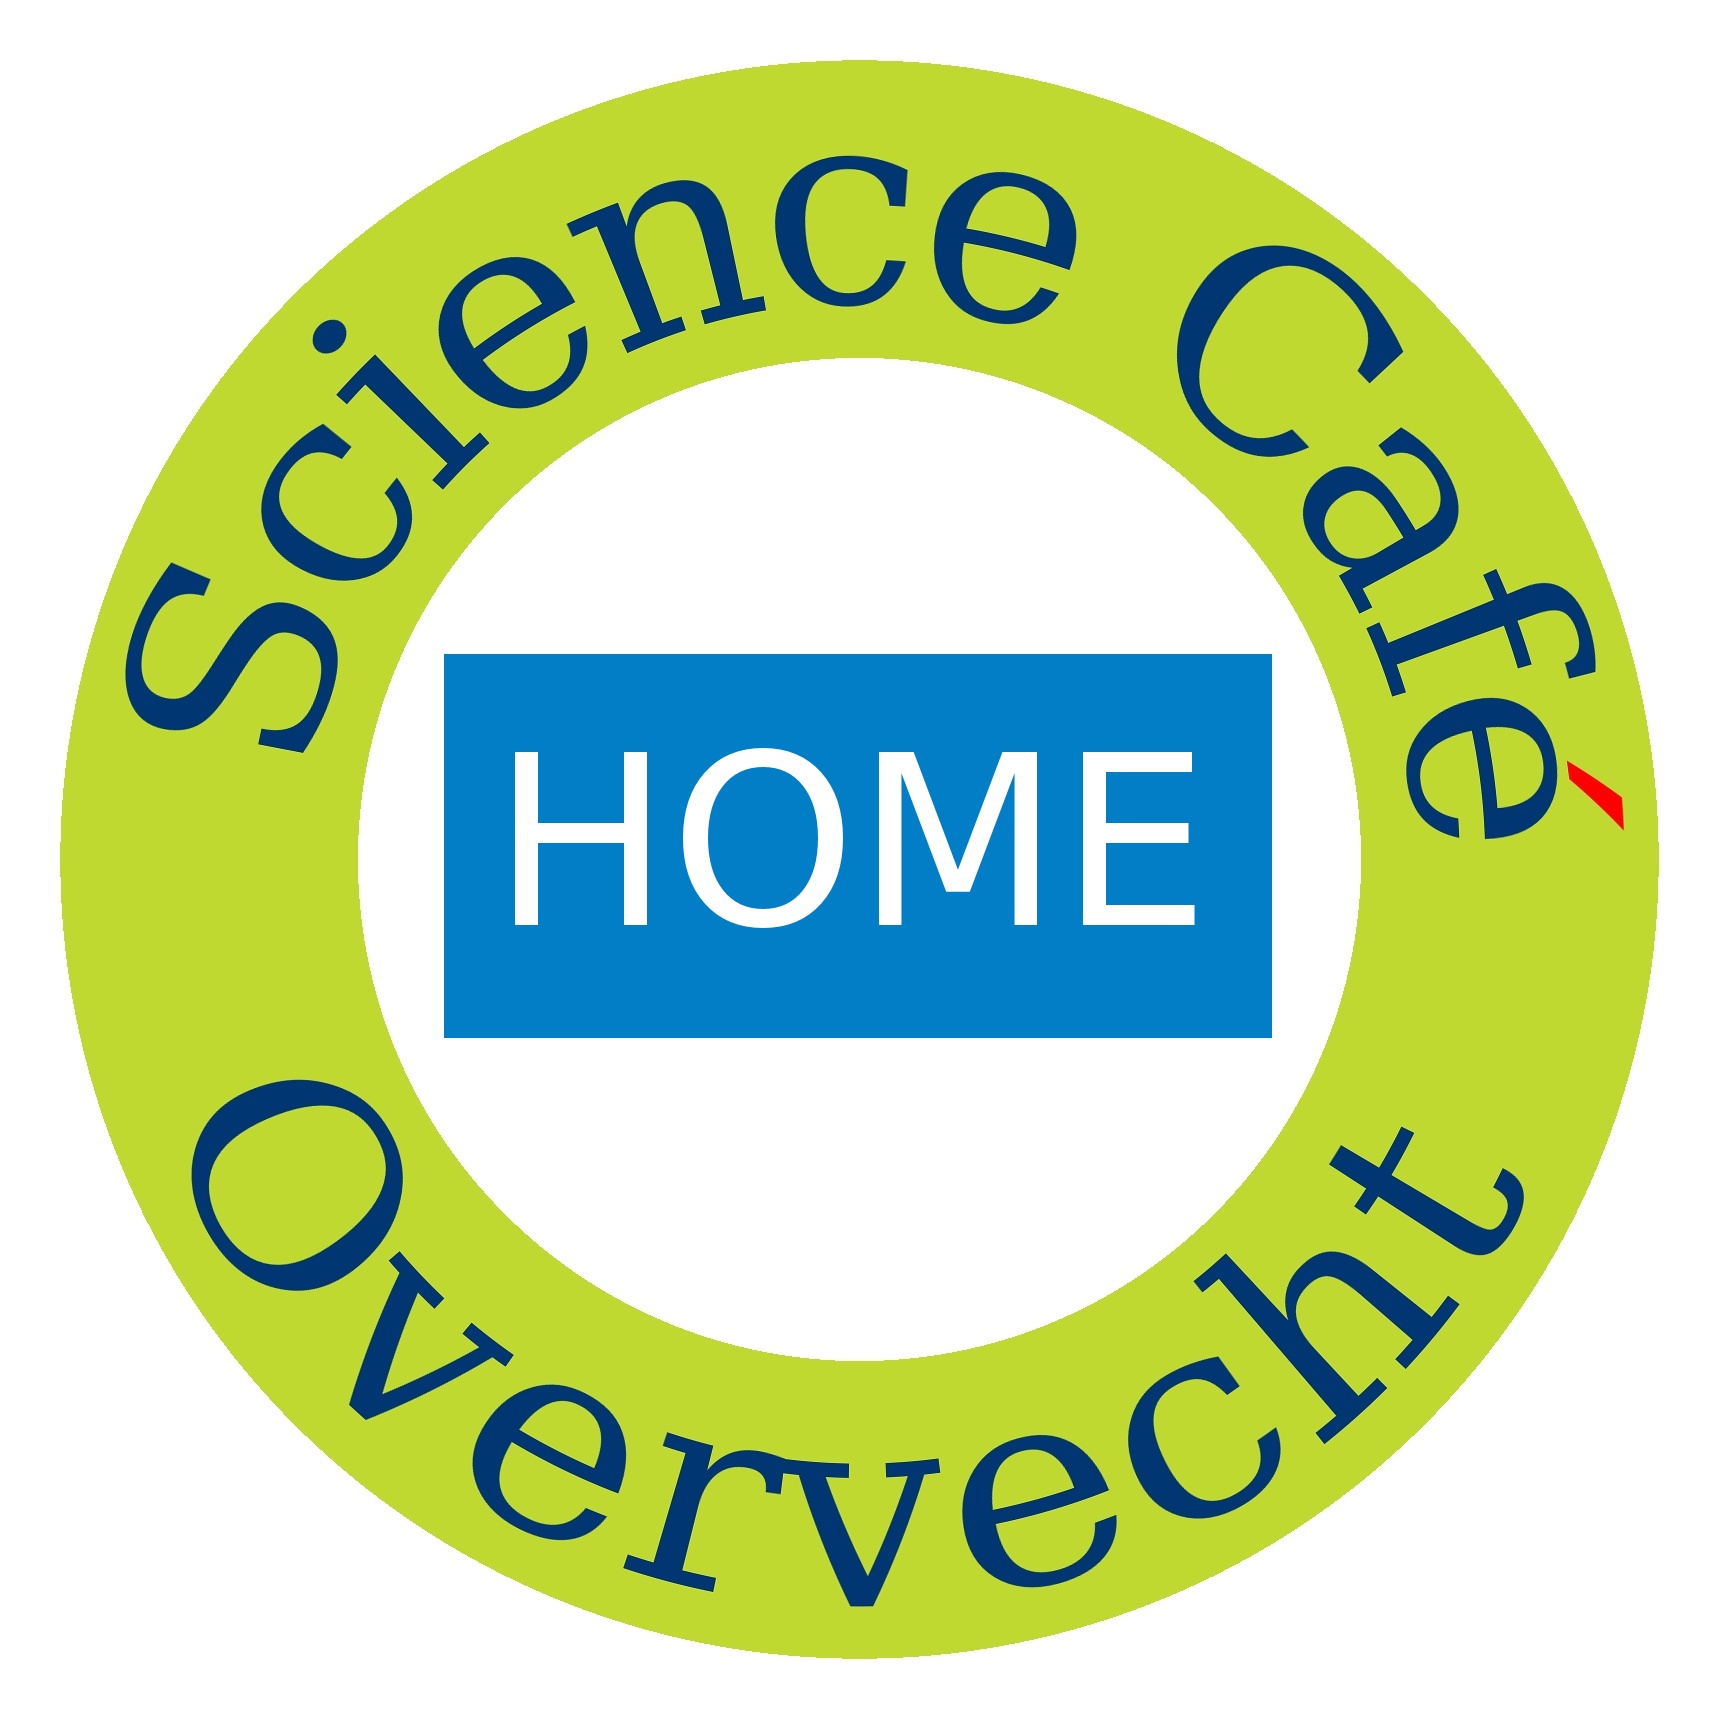 http://www.sciencecafeovervecht.nl/Camping2021/logo-science-cafe-overvecht-home.jpg